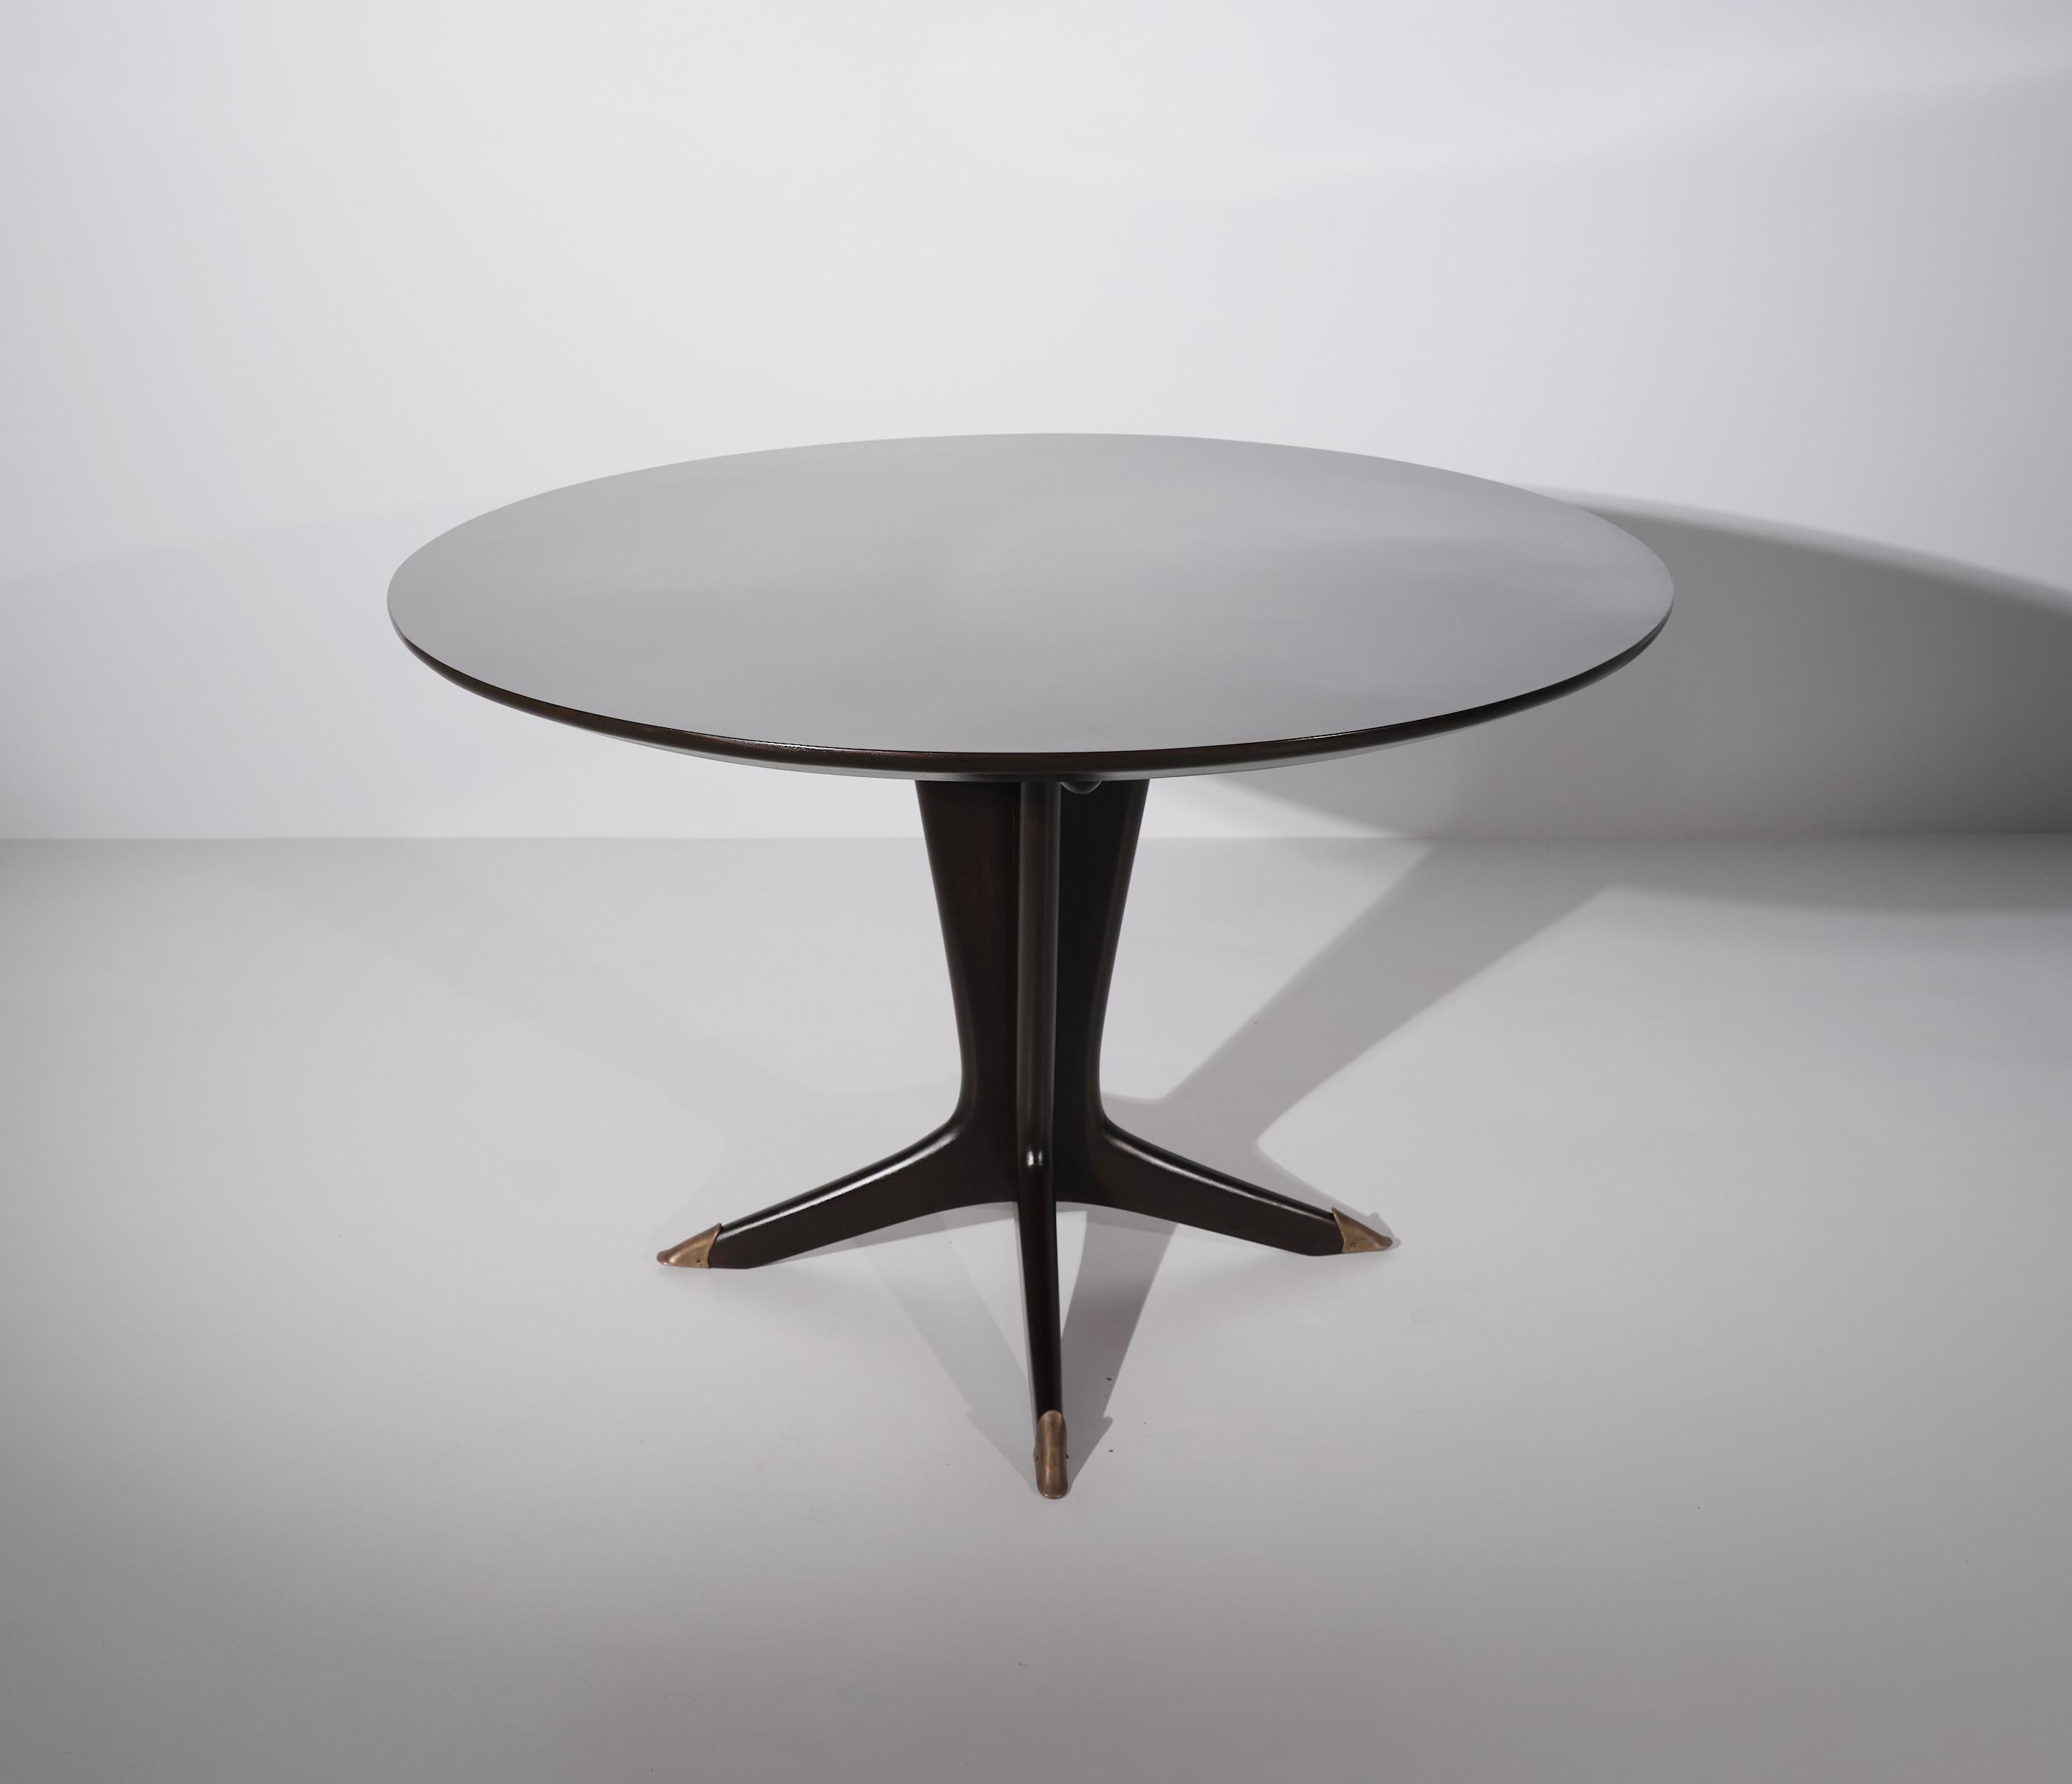 A dining table, manufactured in Italy during the 1950s   

Round Table in dark brown lacquered  wood , fully restored
High Italian carpentry, elegant and sculptural modern design.